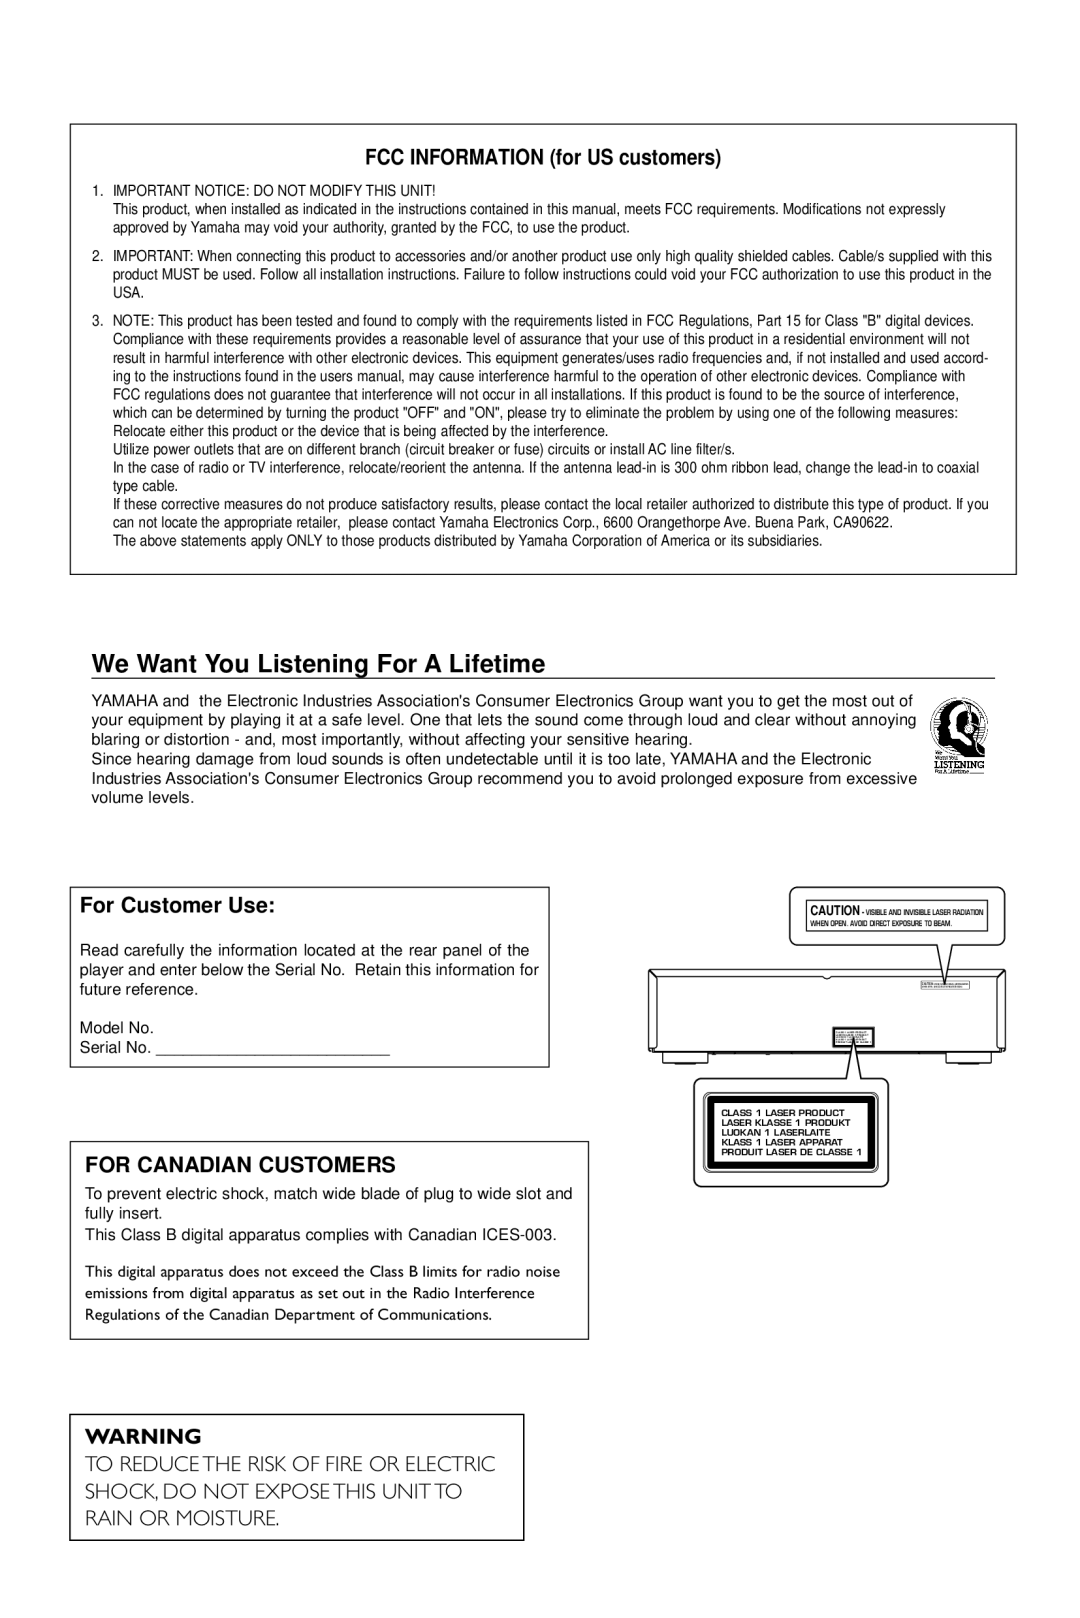 Yamaha DVD-C940 owner manual FCC INFORMATION for US customers, For Customer Use, For Canadian Customers 